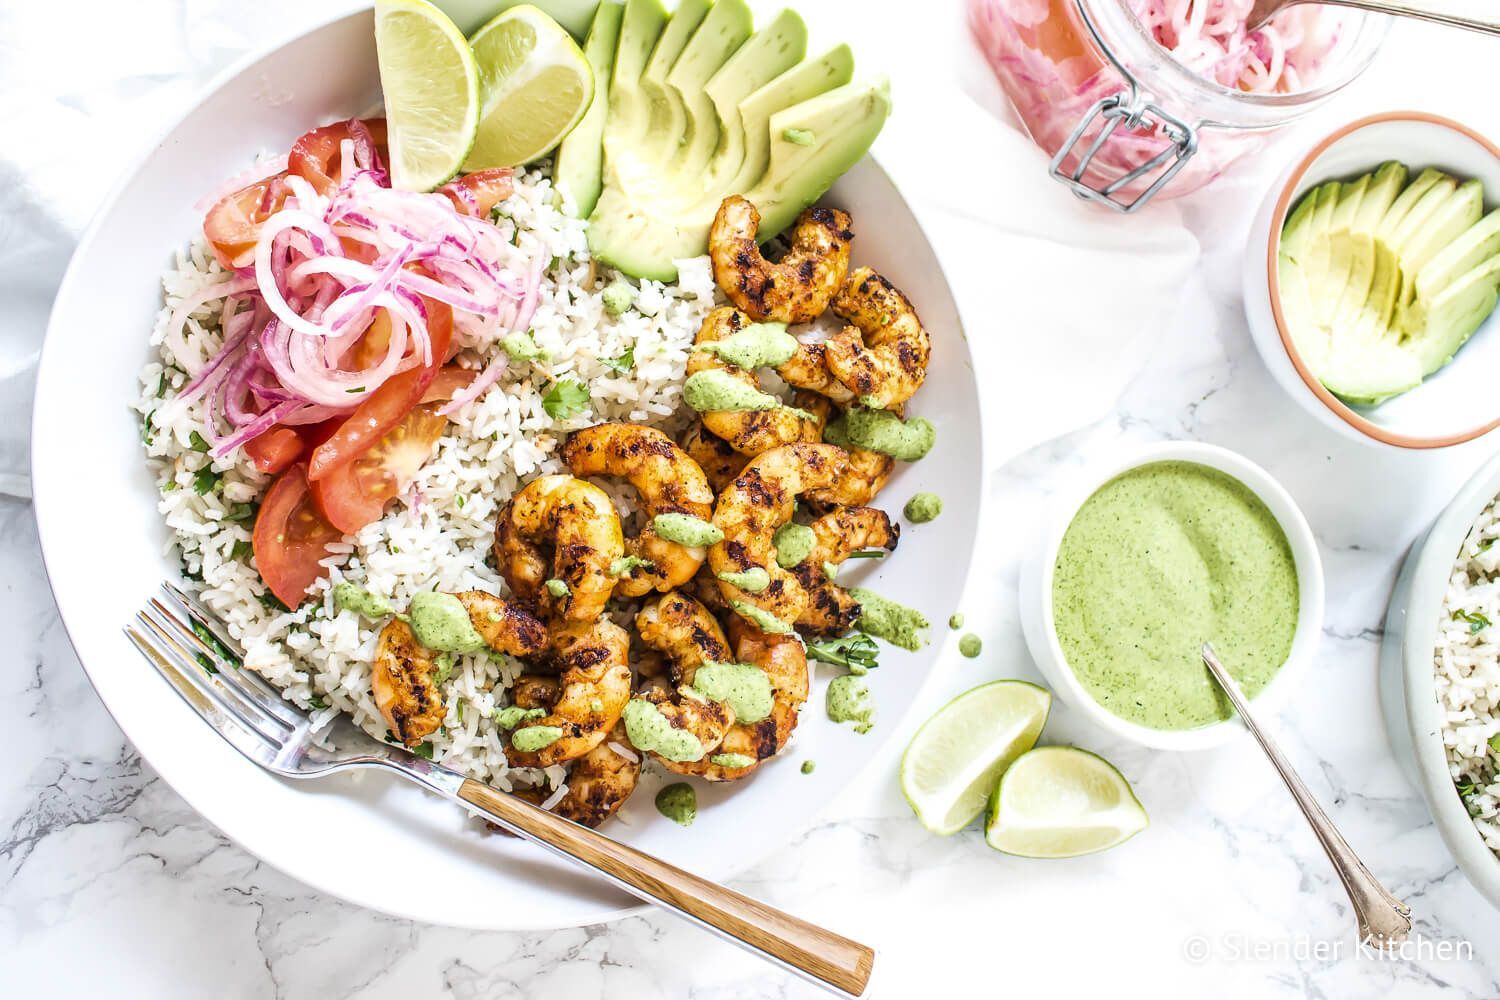 Shrimp rice bowls with grilled shrimp, white rice, cilantro mint sauce, salsa criolla, and sliced avocado.